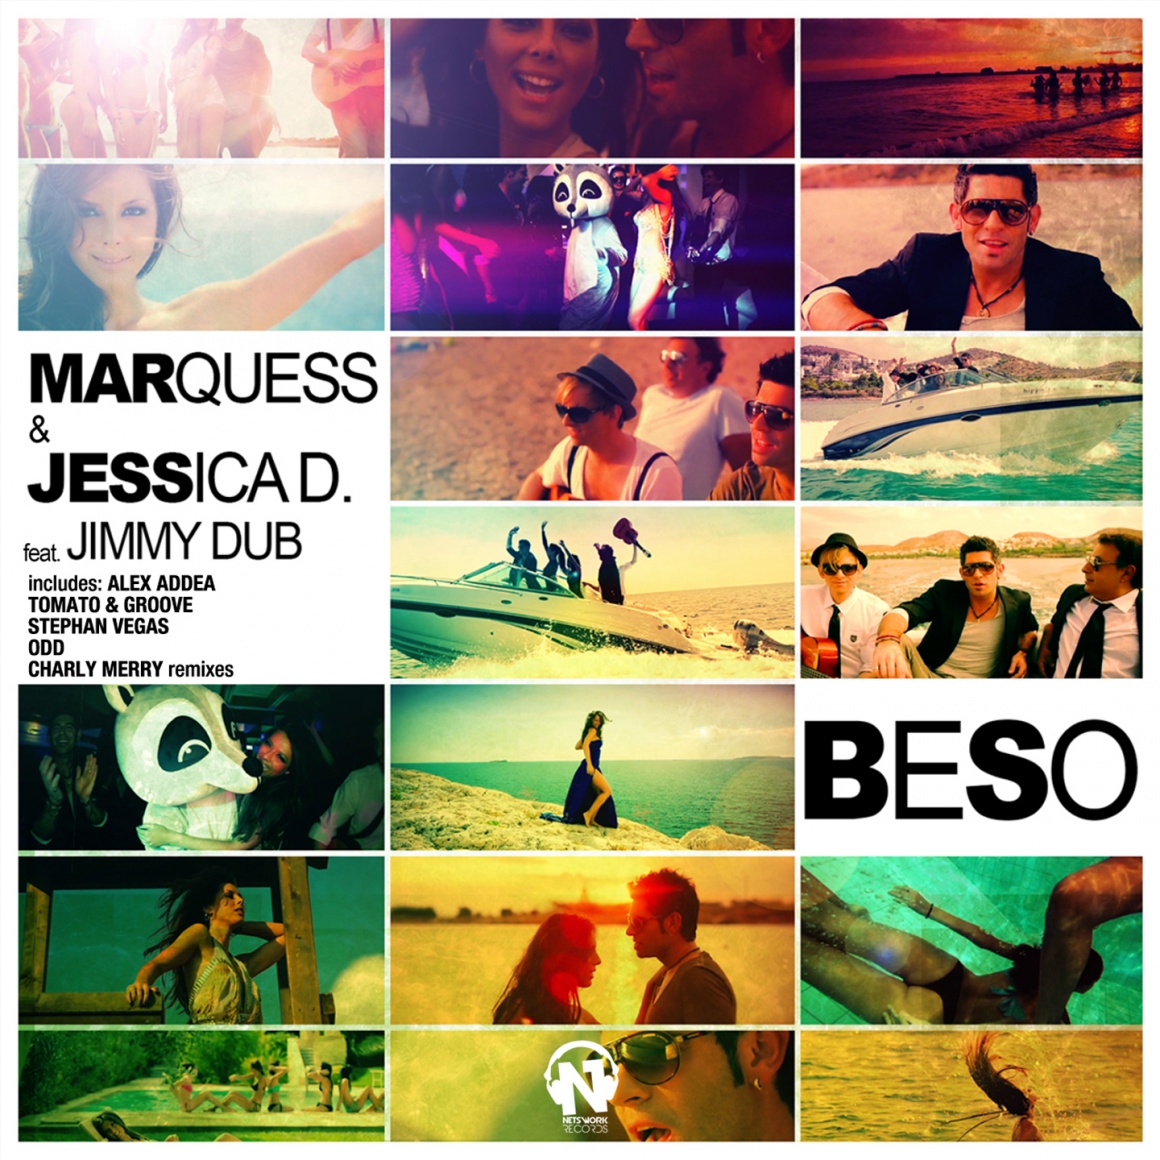 MARQUESS & JESSICA D Feat. JIMMY DUB  “Beso”